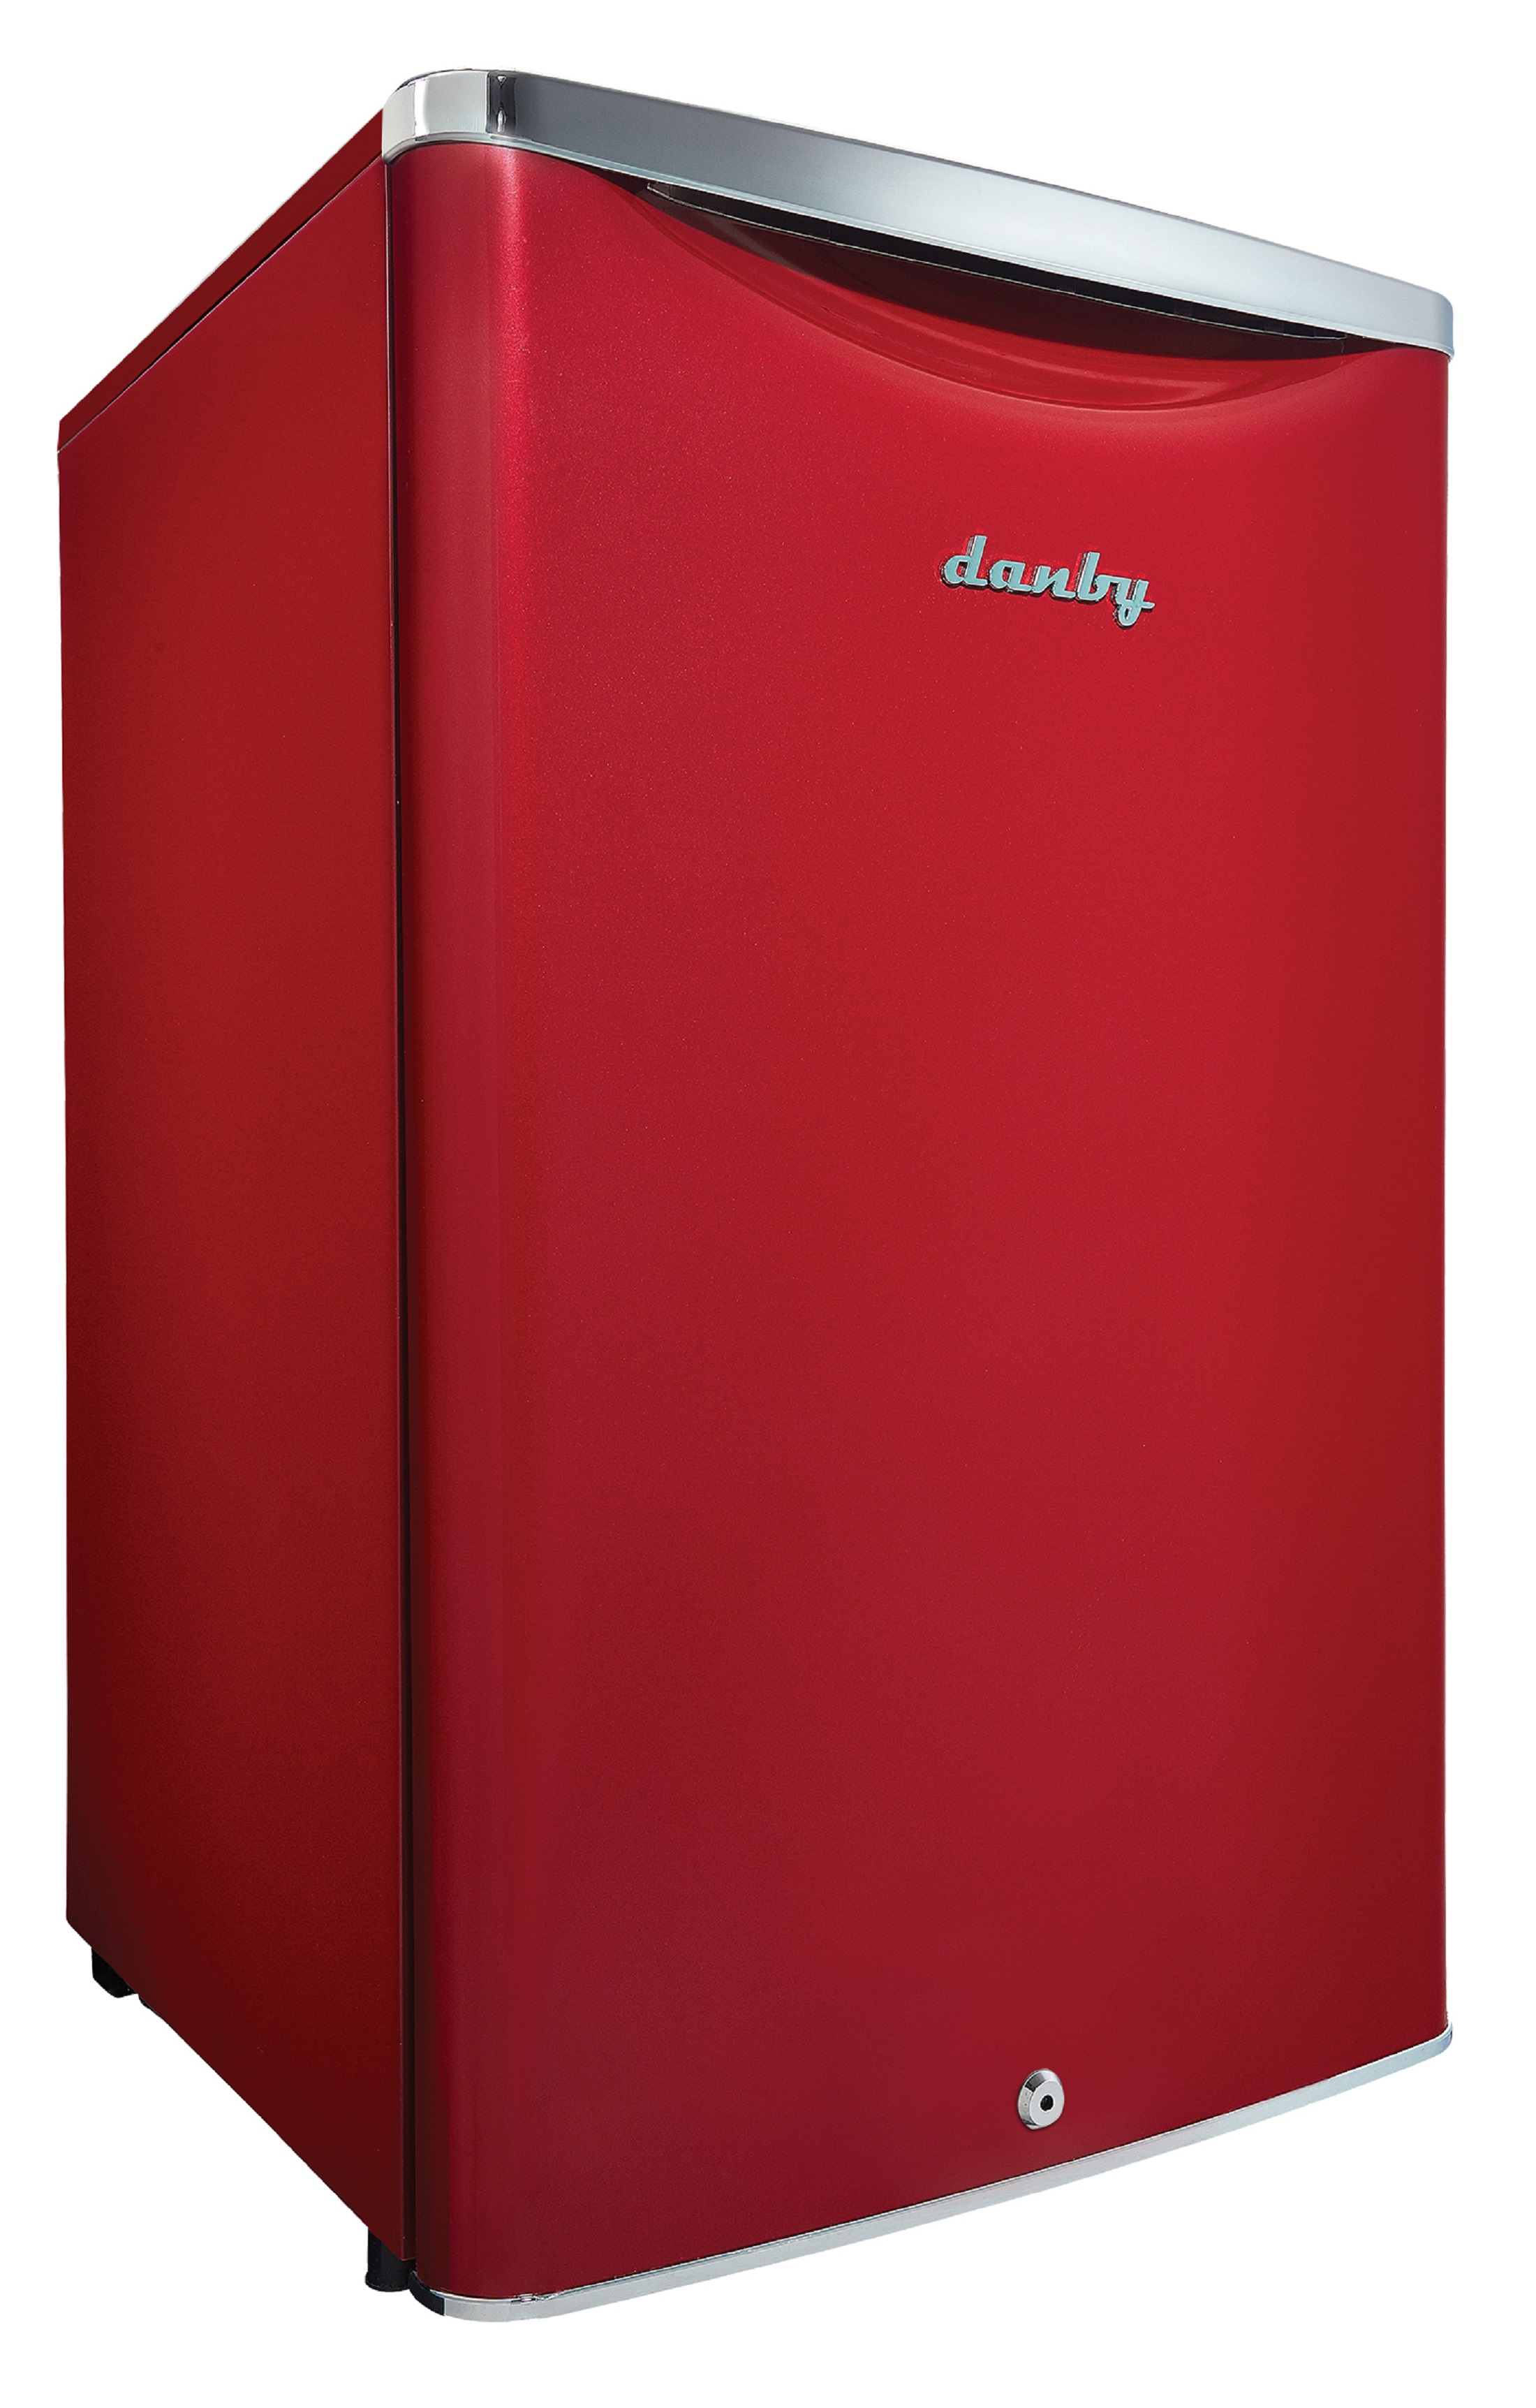 Danby DAR044A6LDB 4.4 Cu. Ft. (124 L) Capacity Retro Mini All-Refrigerator in Metallic Red Featuring Danby’s patented design and Energy Star Compliant - image 2 of 9